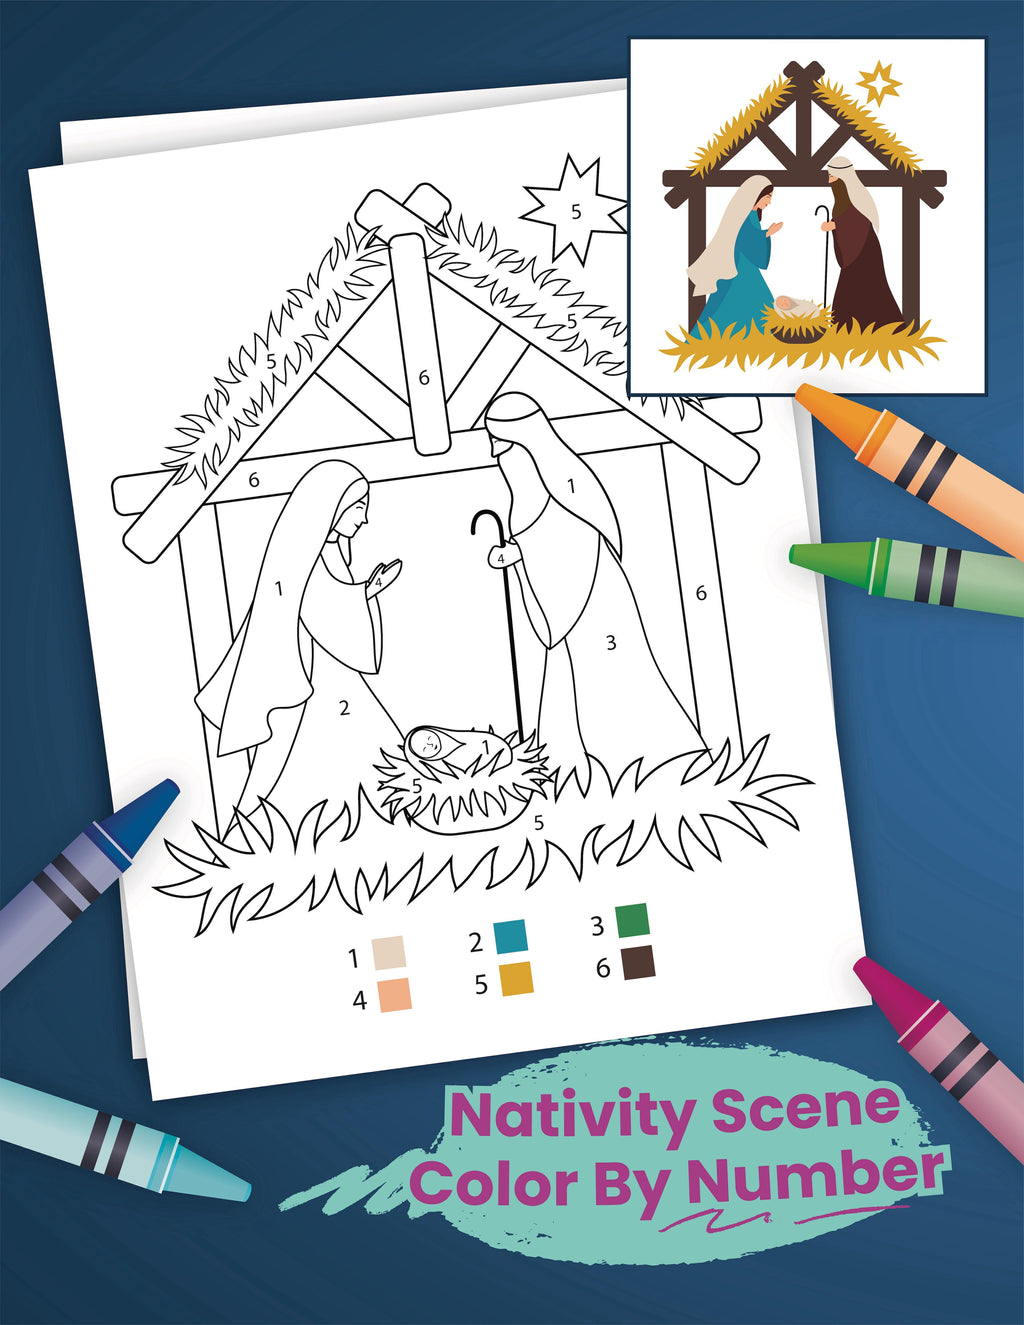 Nativity scene color by number